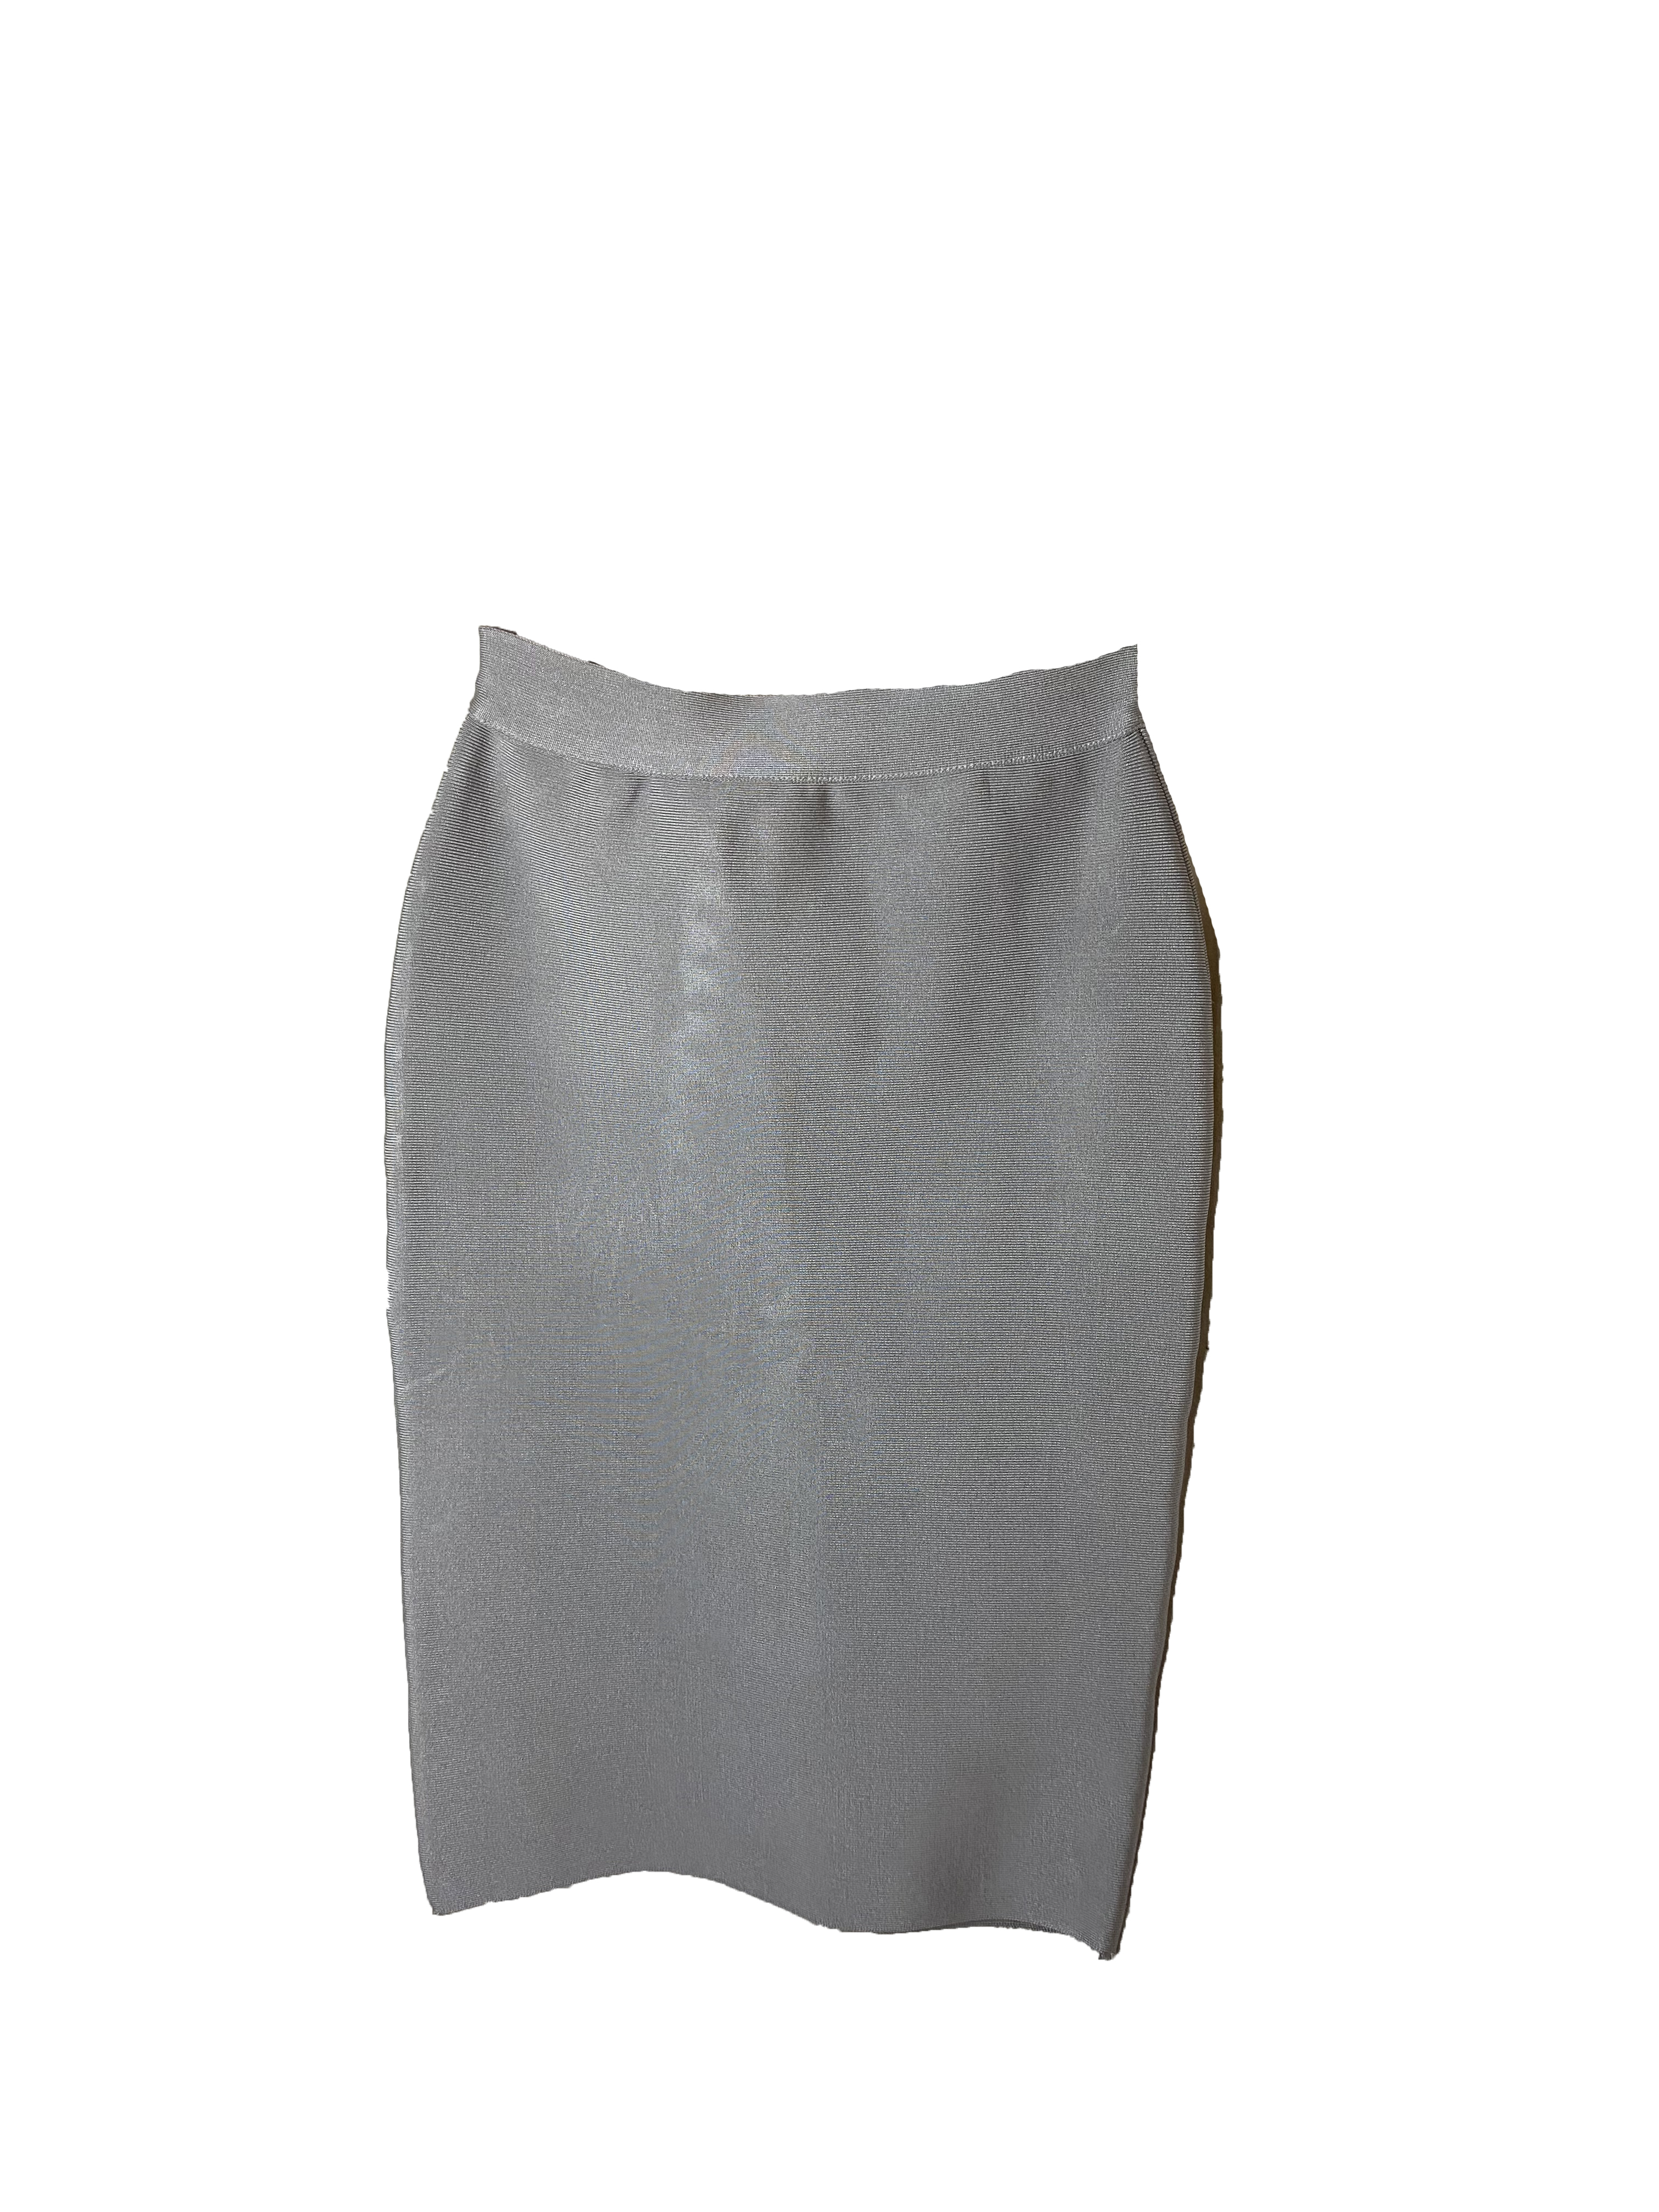 Unlabelled - Tight Fit Skirt 0